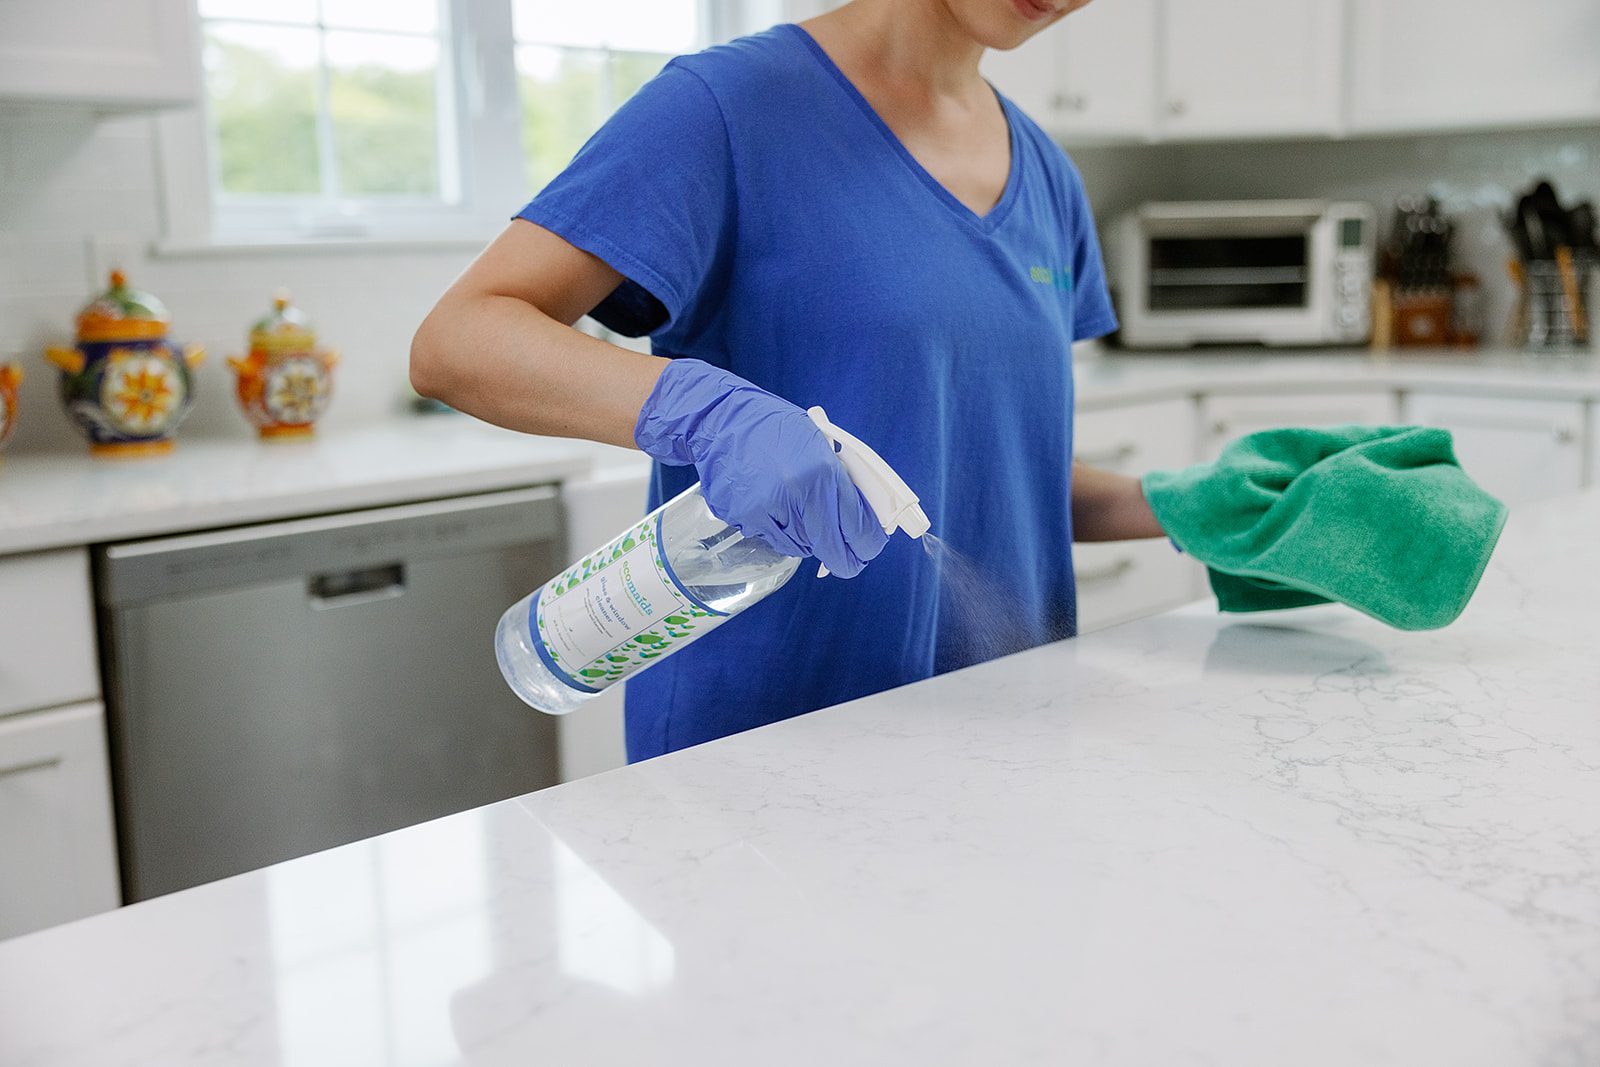 Maid Services in Greater Omaha